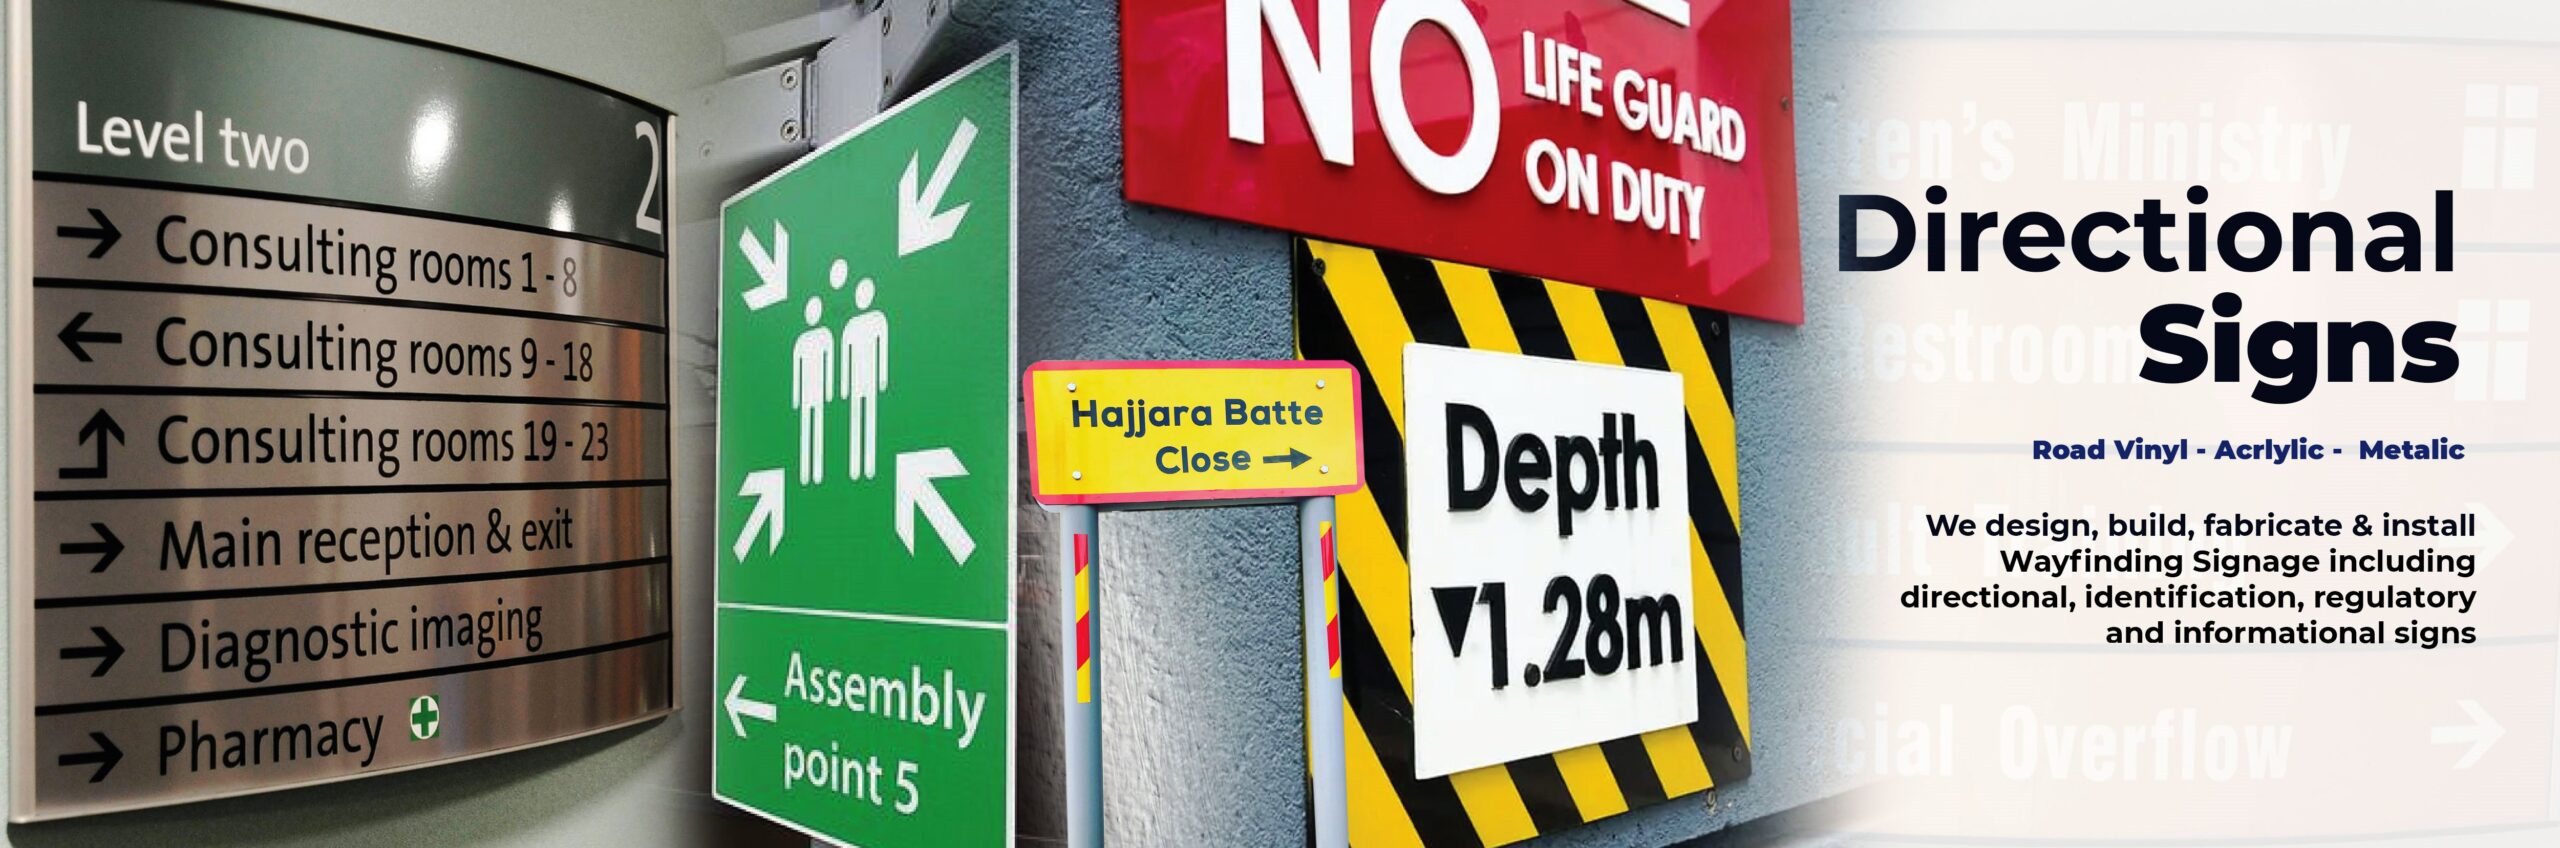 directional signs safety signs